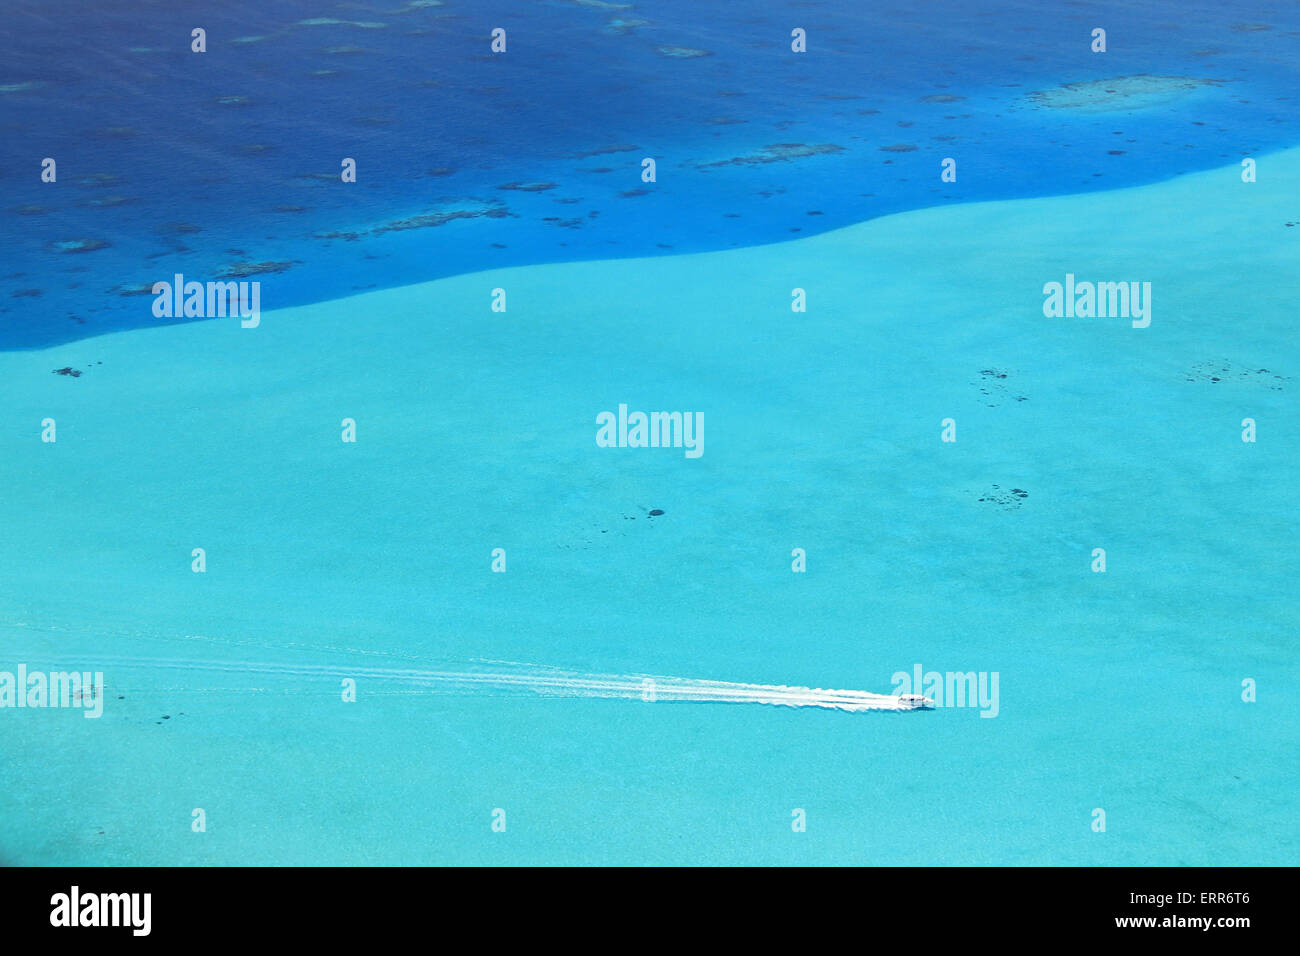 Flight View of a Motor Boat Crossing a Coral Reef, Maldives Stock Photo